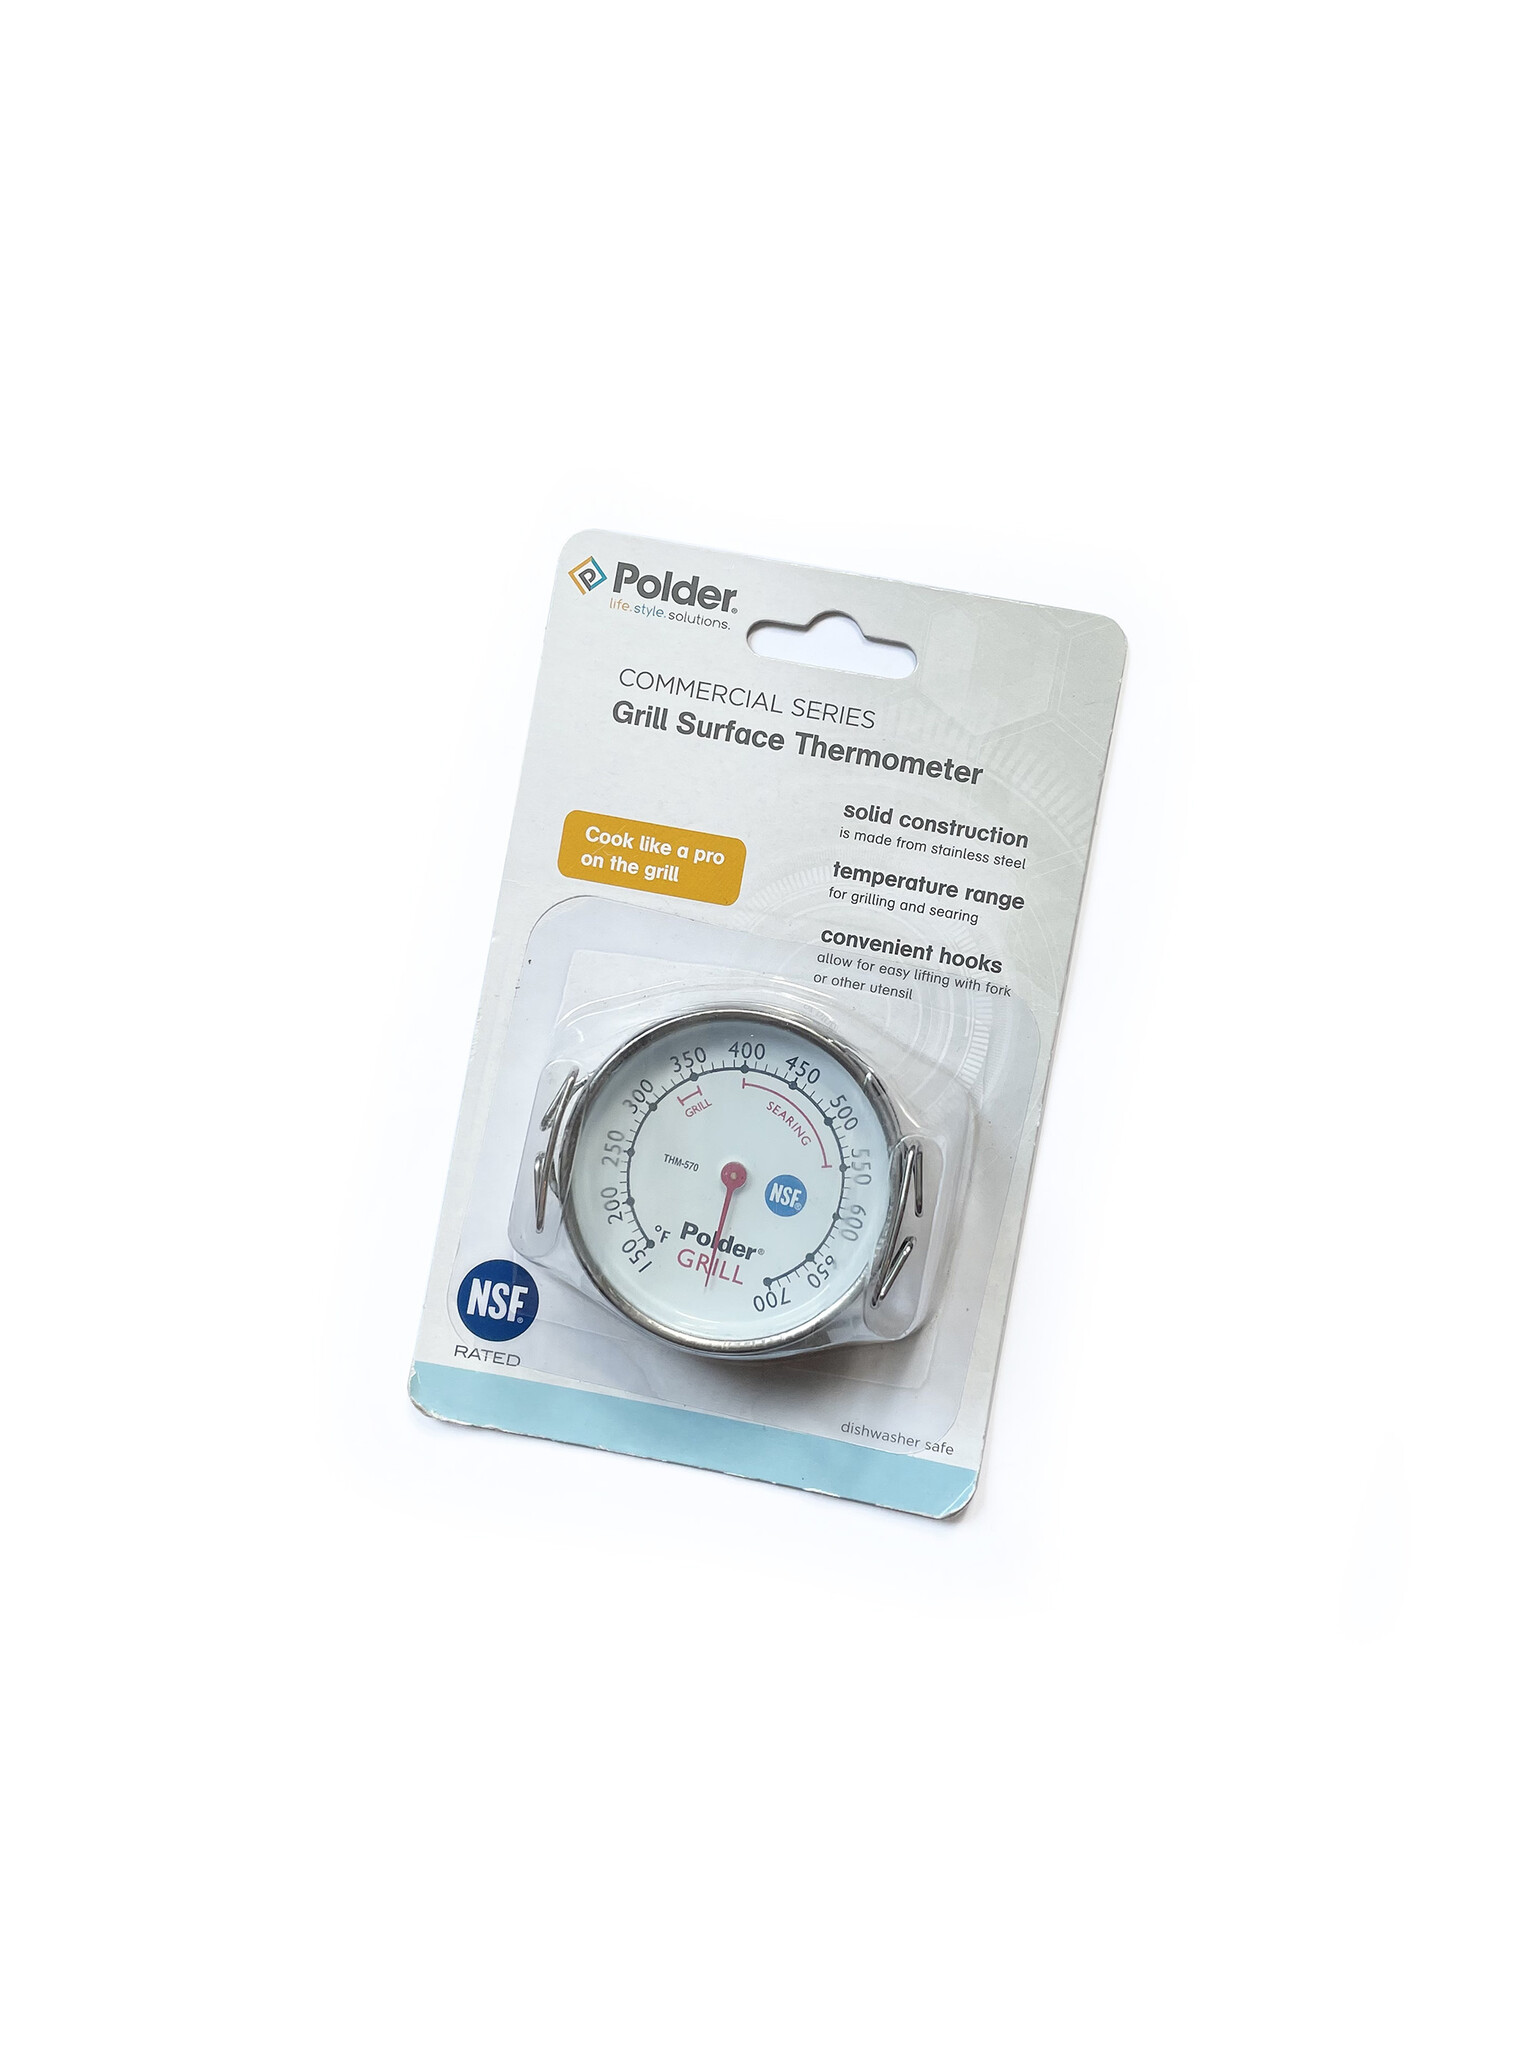 Polder - Grill Surface Thermometer